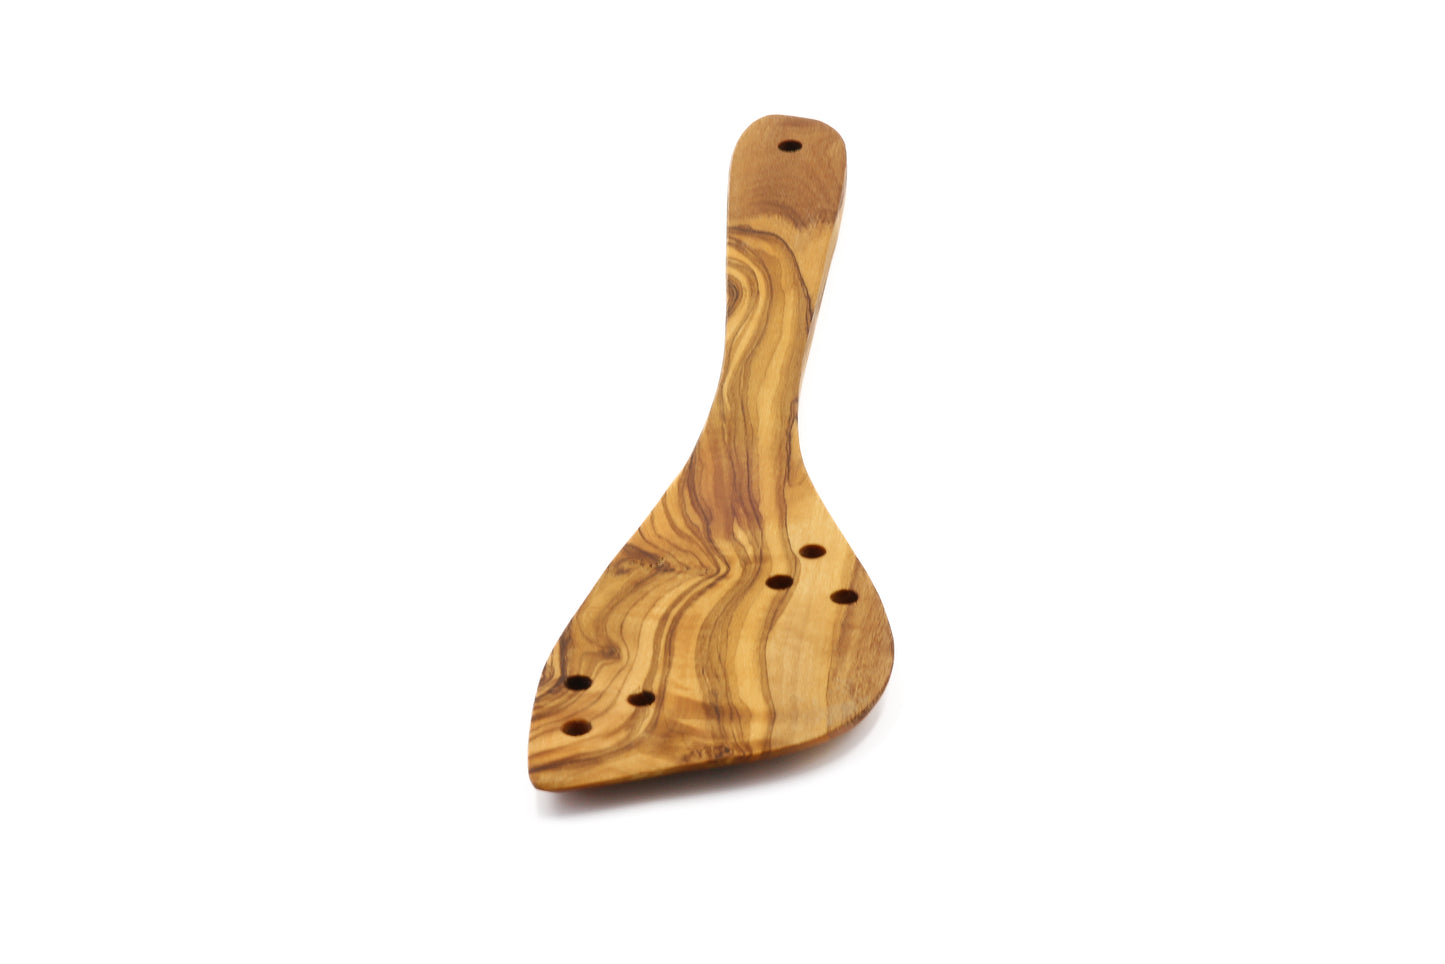 Handmade olive wood spatula with perforations